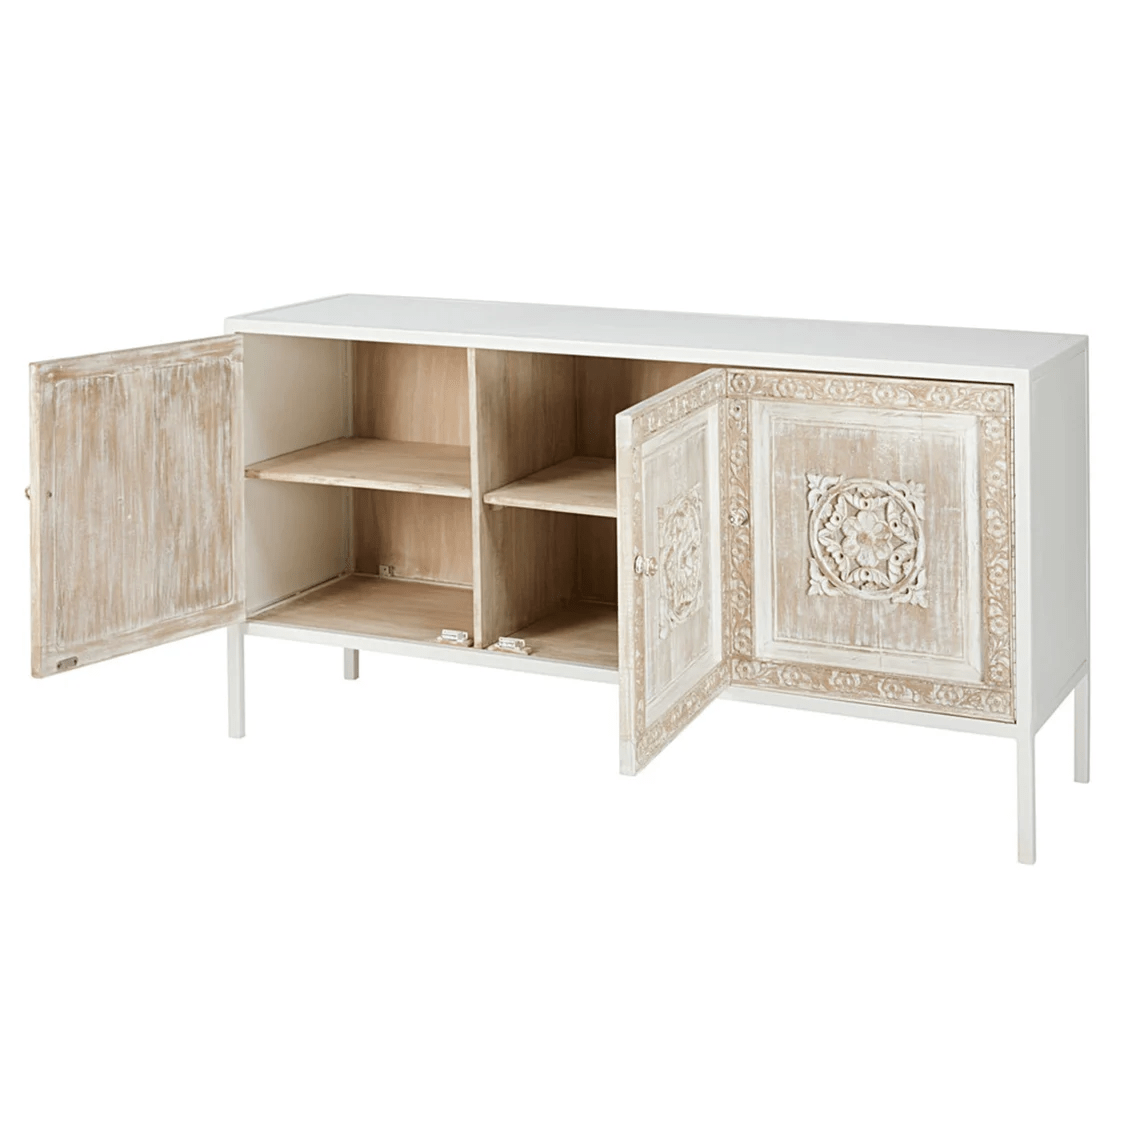 Handmade White Color 3-Door Sideboard | Hand-carved Indian Antique Buffet Table Buffet & Sideboard - Bone Inlay Furnitures